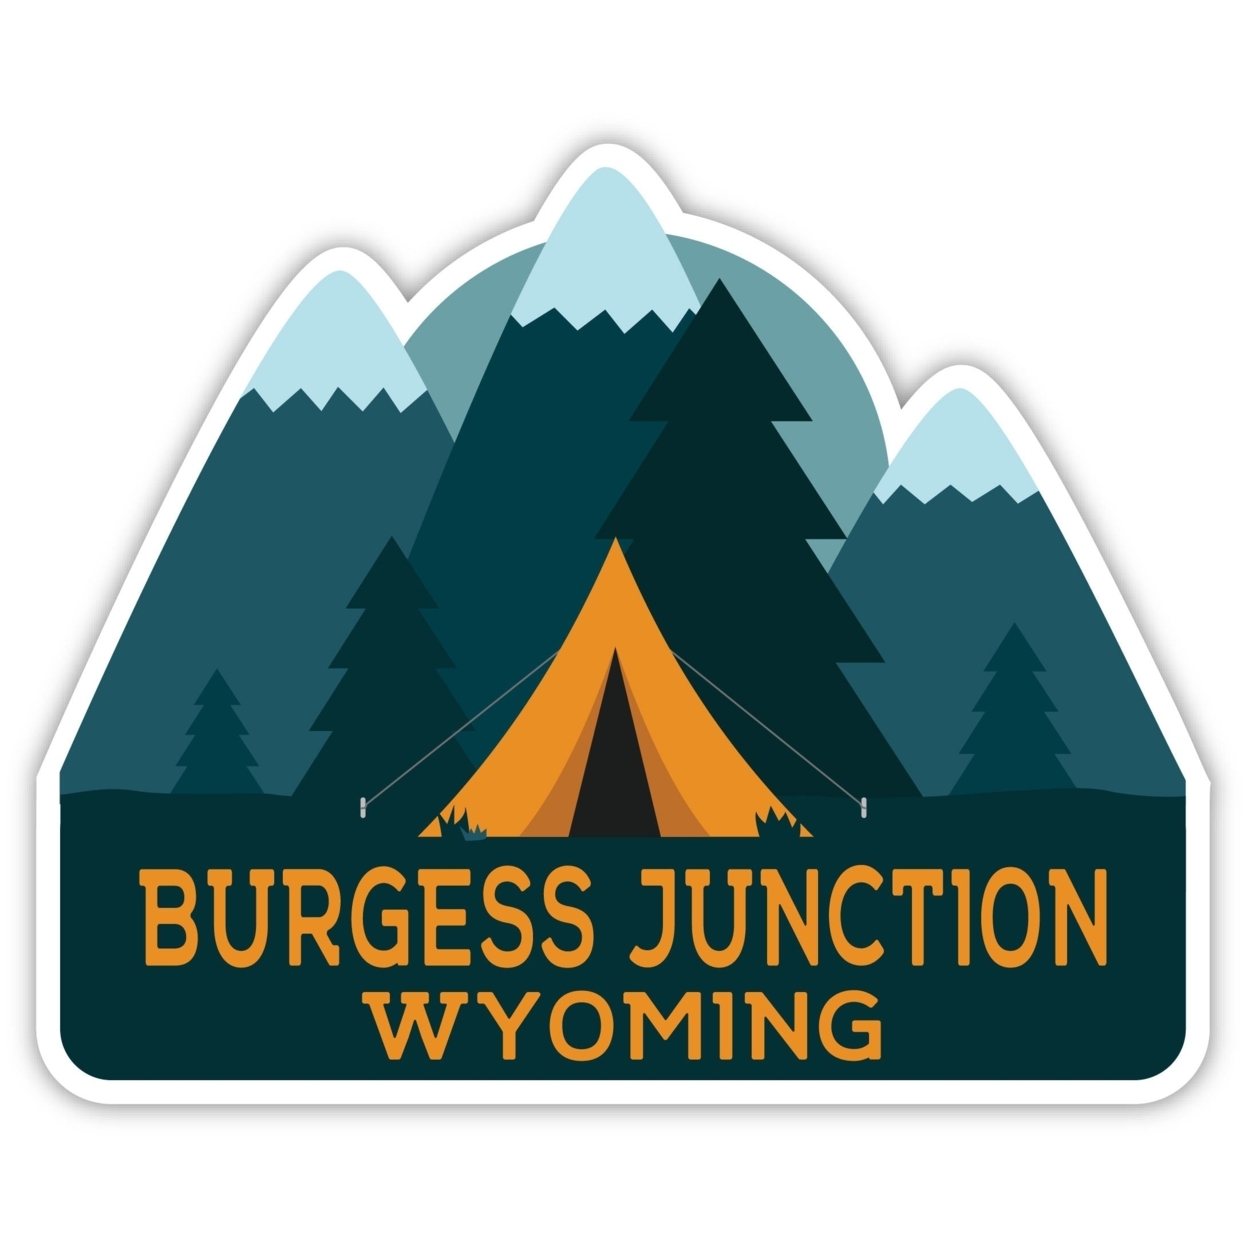 Burgess Junction Wyoming Souvenir Decorative Stickers (Choose Theme And Size) - 4-Pack, 4-Inch, Tent